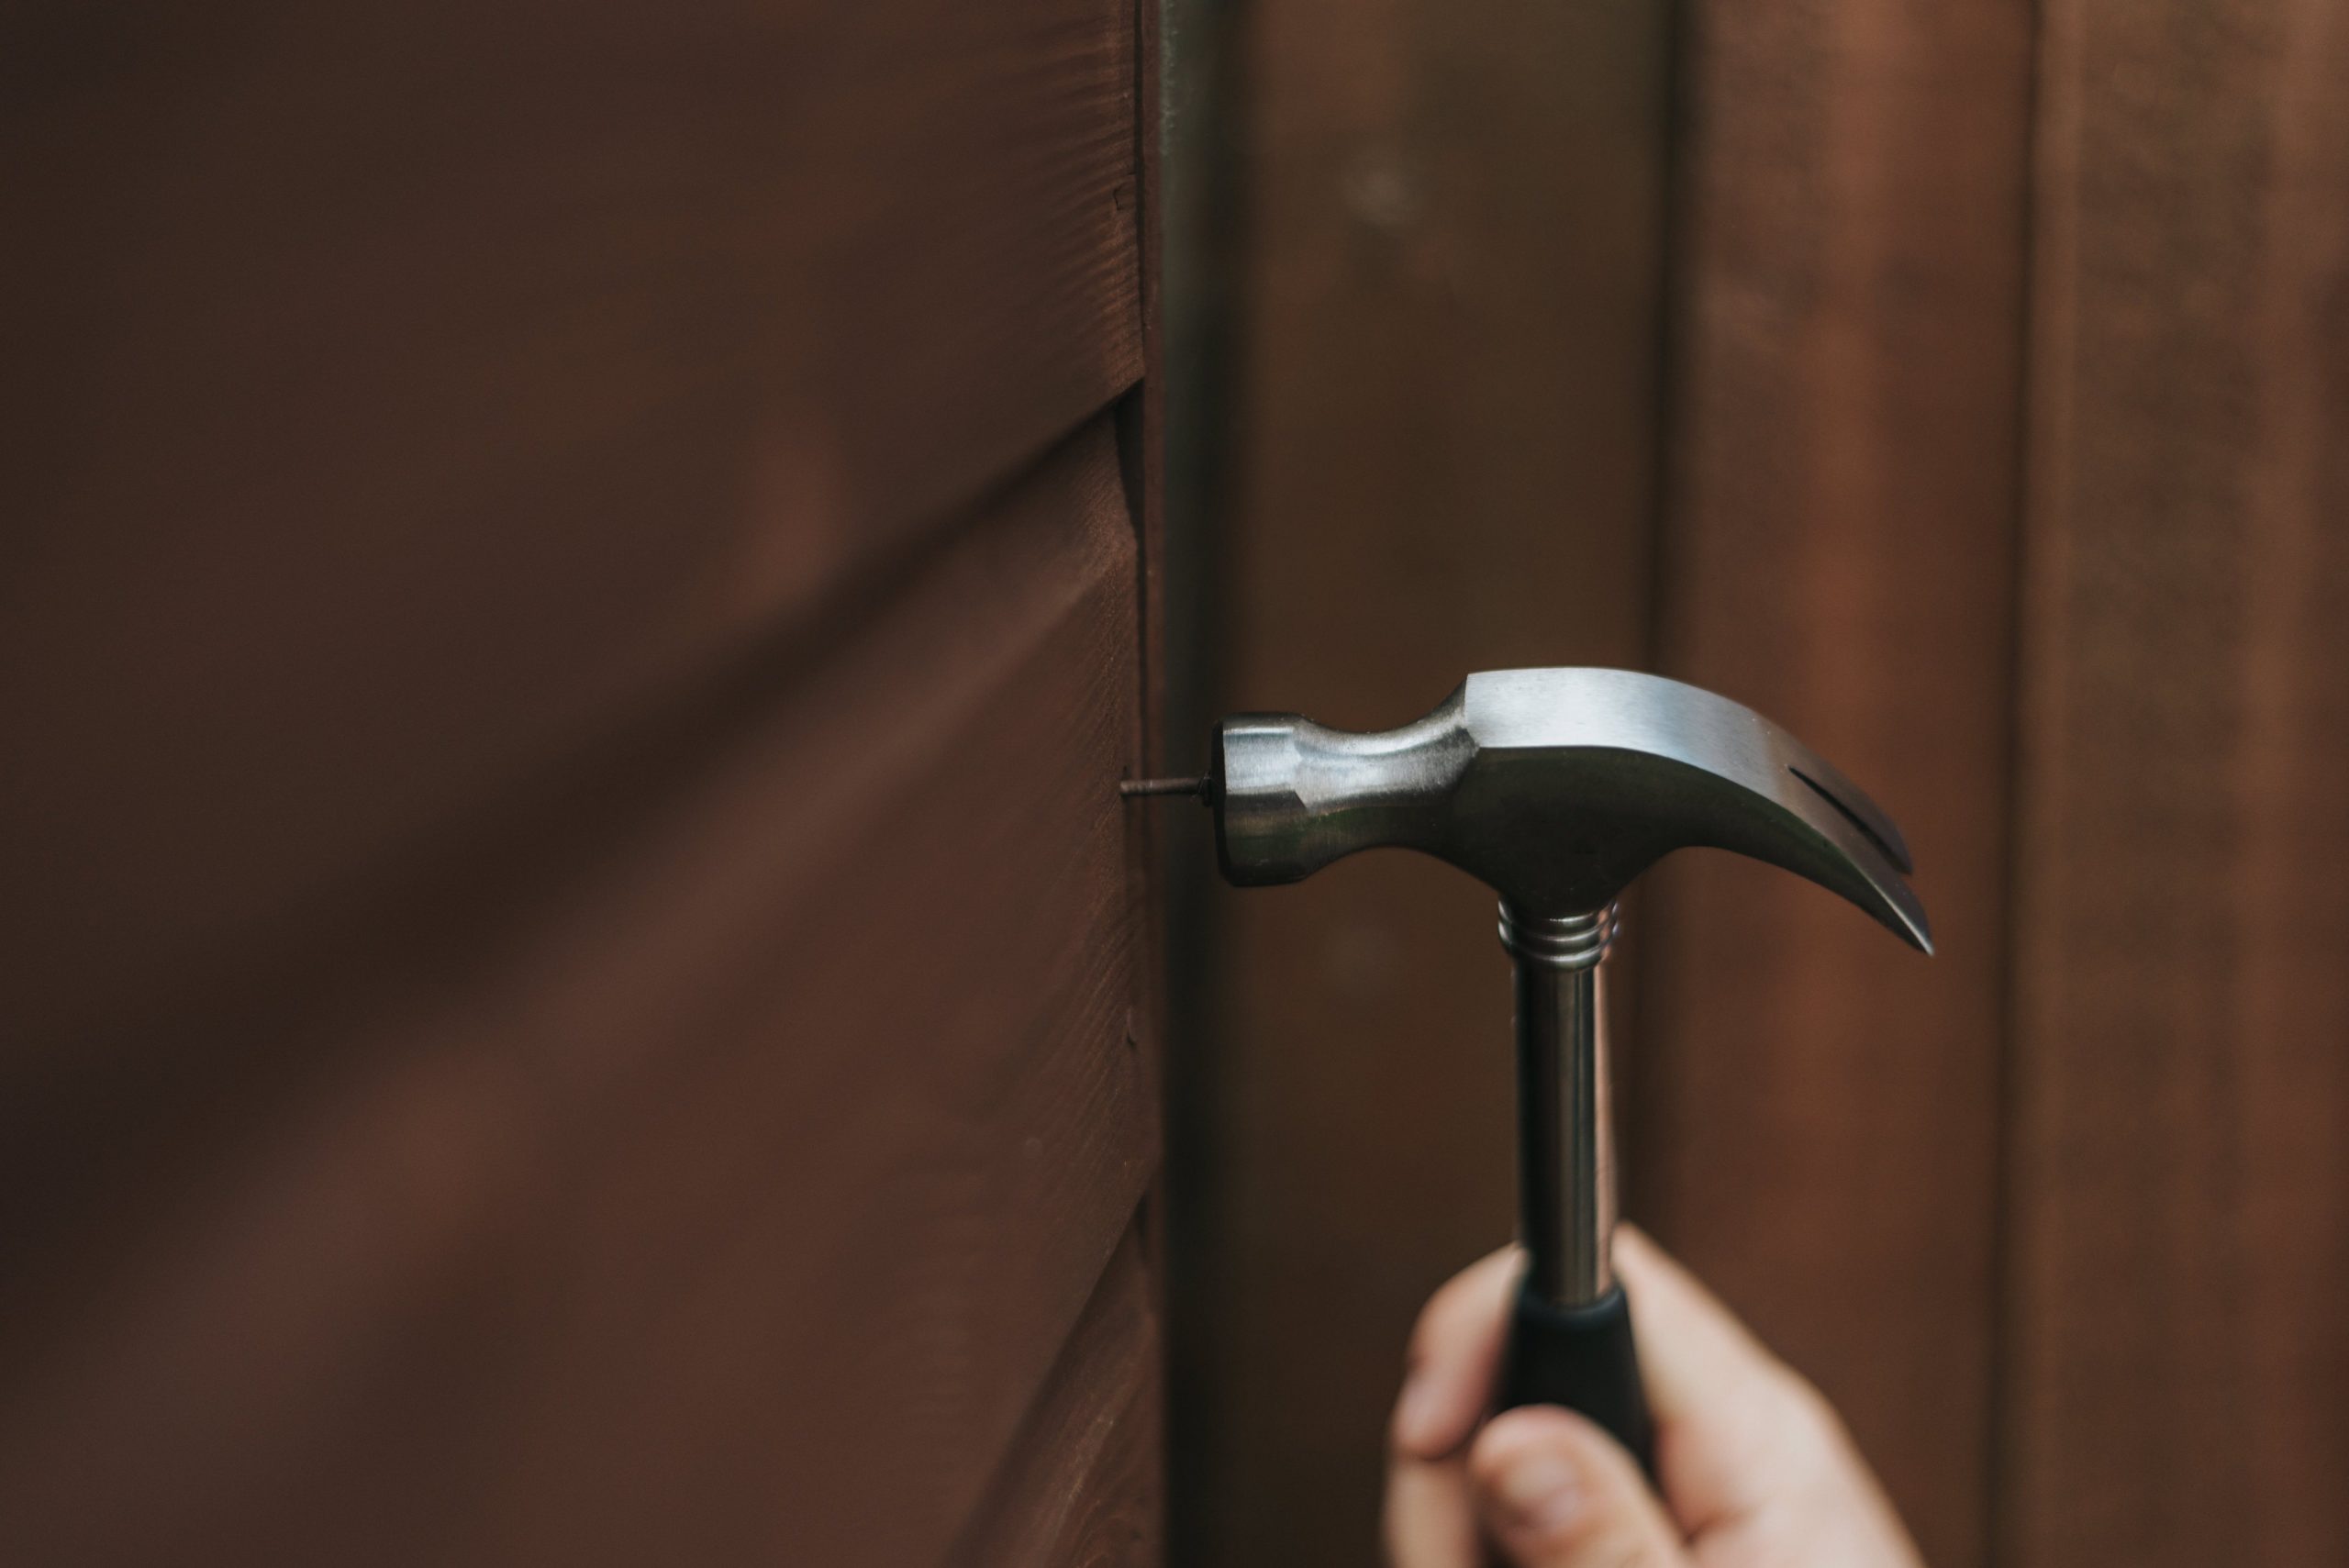 A hammer puts a nail into a piece of wood, an example of a maintenance request being filled by Hoffman Realty